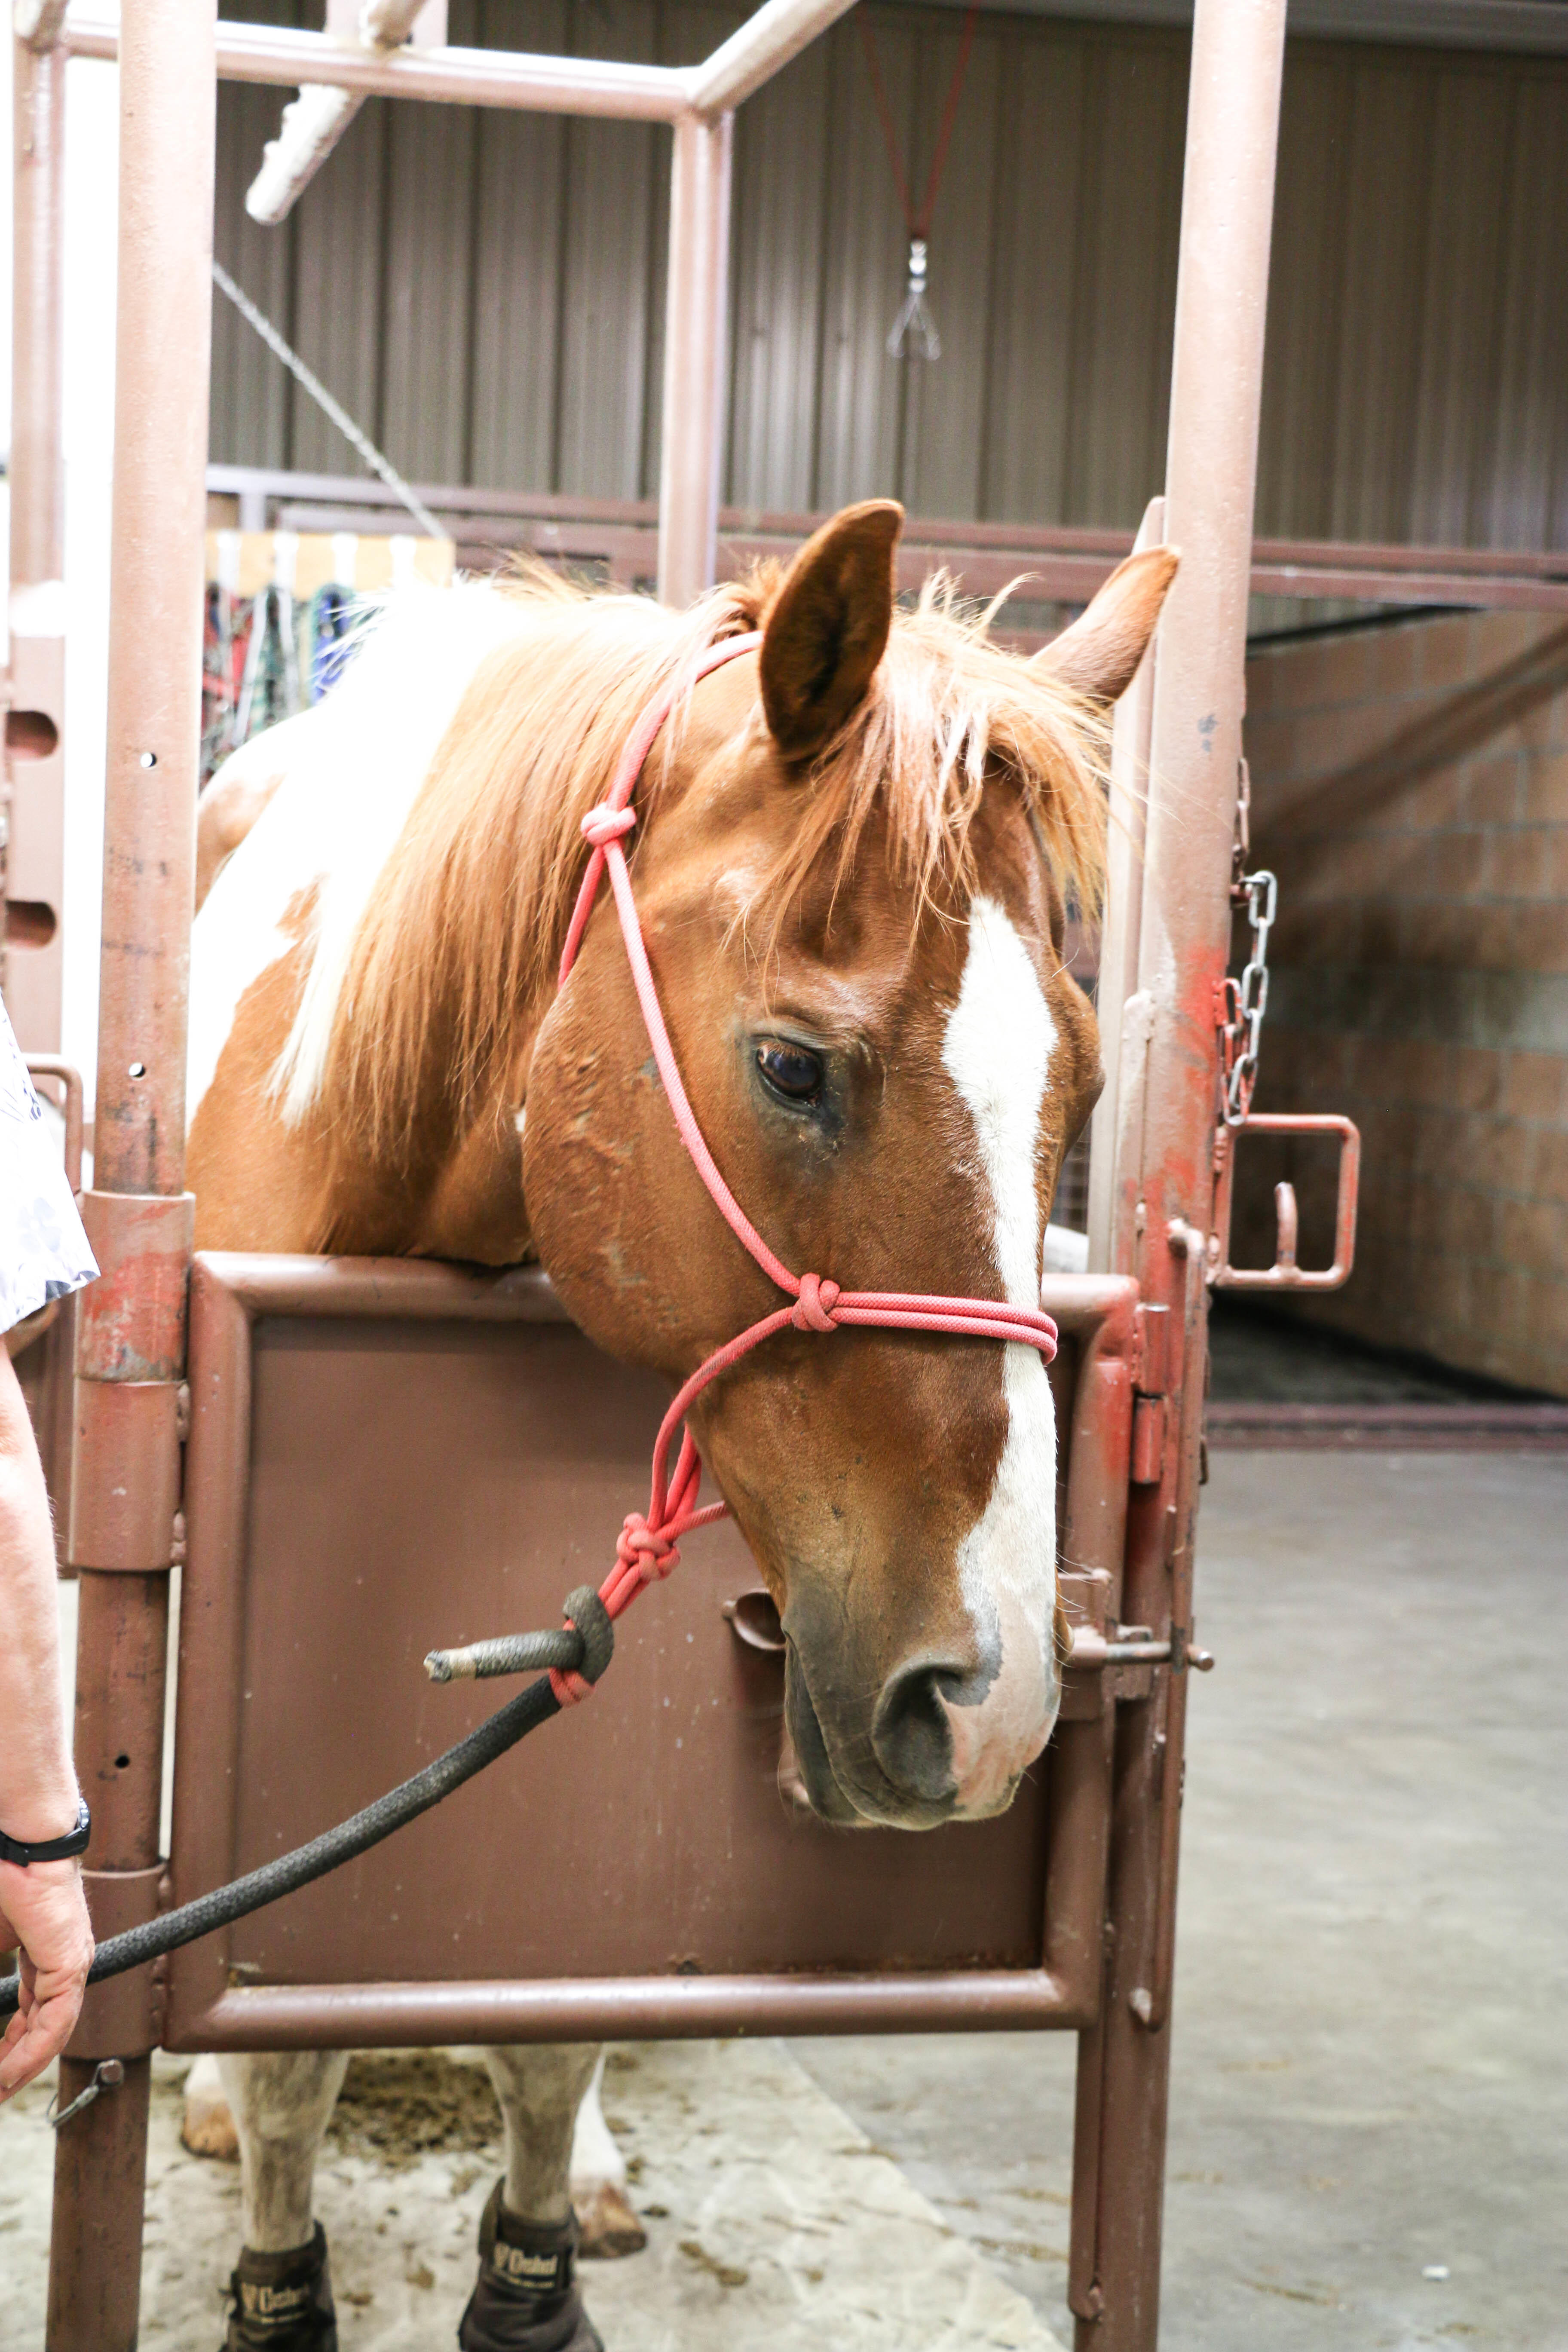 Not only do we treat dogs and cats, we also treat equine and large animals! We are one of the only veterinary facilities in the area that offers care to large animals, so we tend to have a lot of visitors from surrounding counties. Regardless, any patient who walks in our doors is promised high quality treatment!